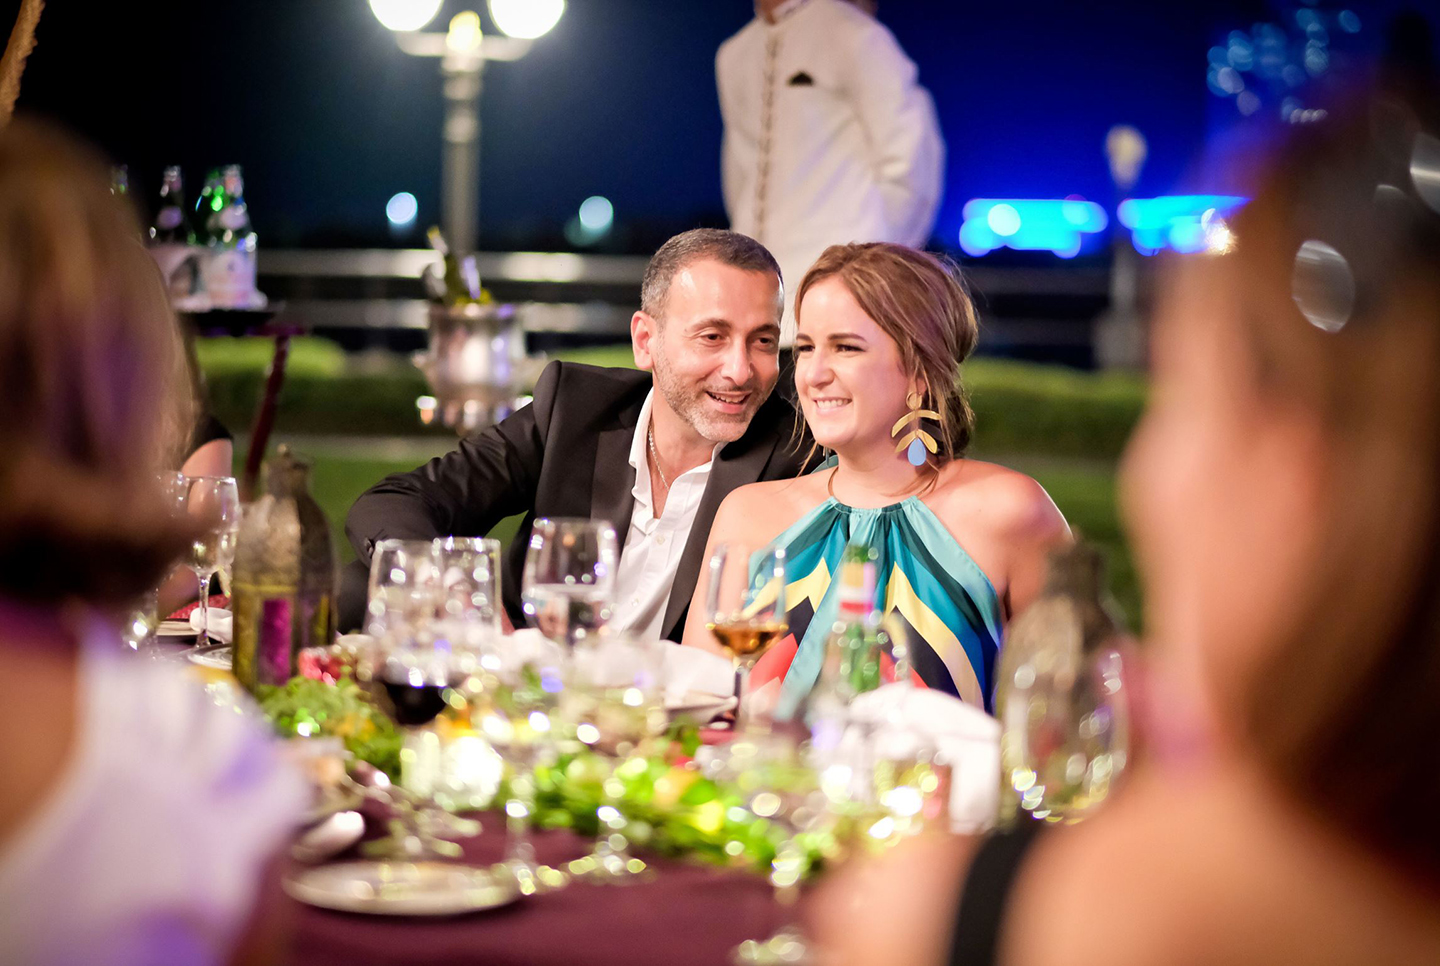 Event planners UAE